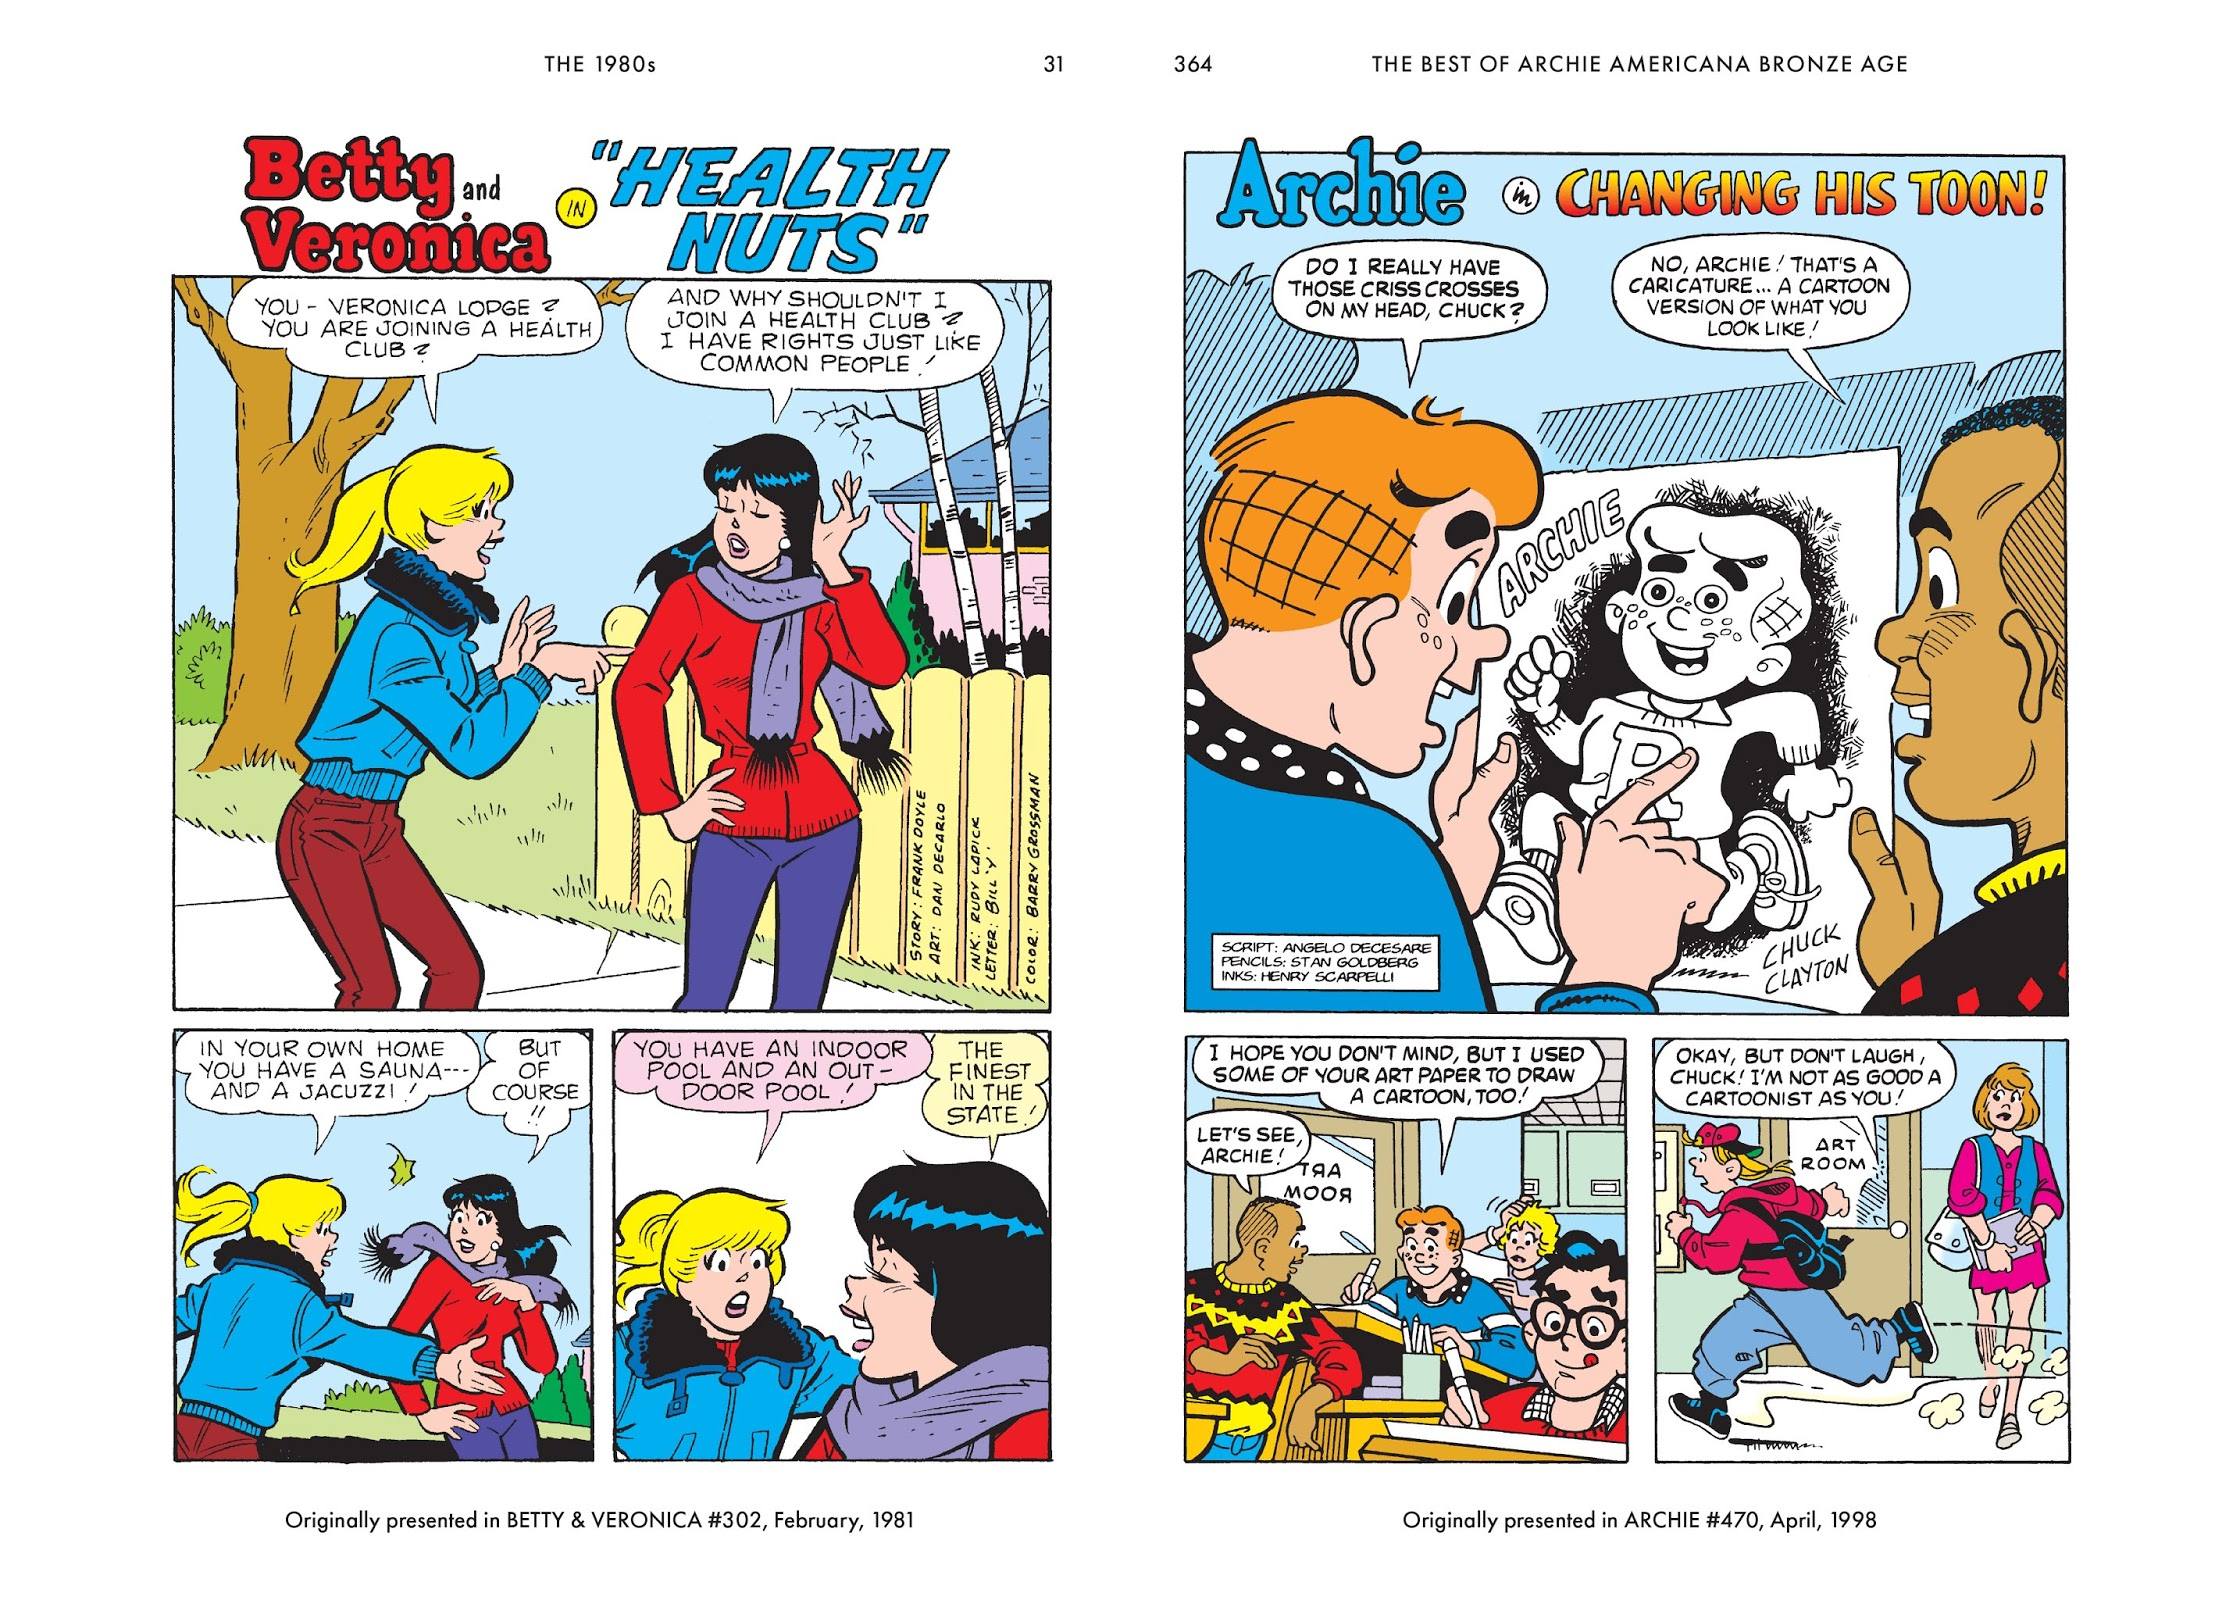 The Best of Archie Americana The Bronze Age review